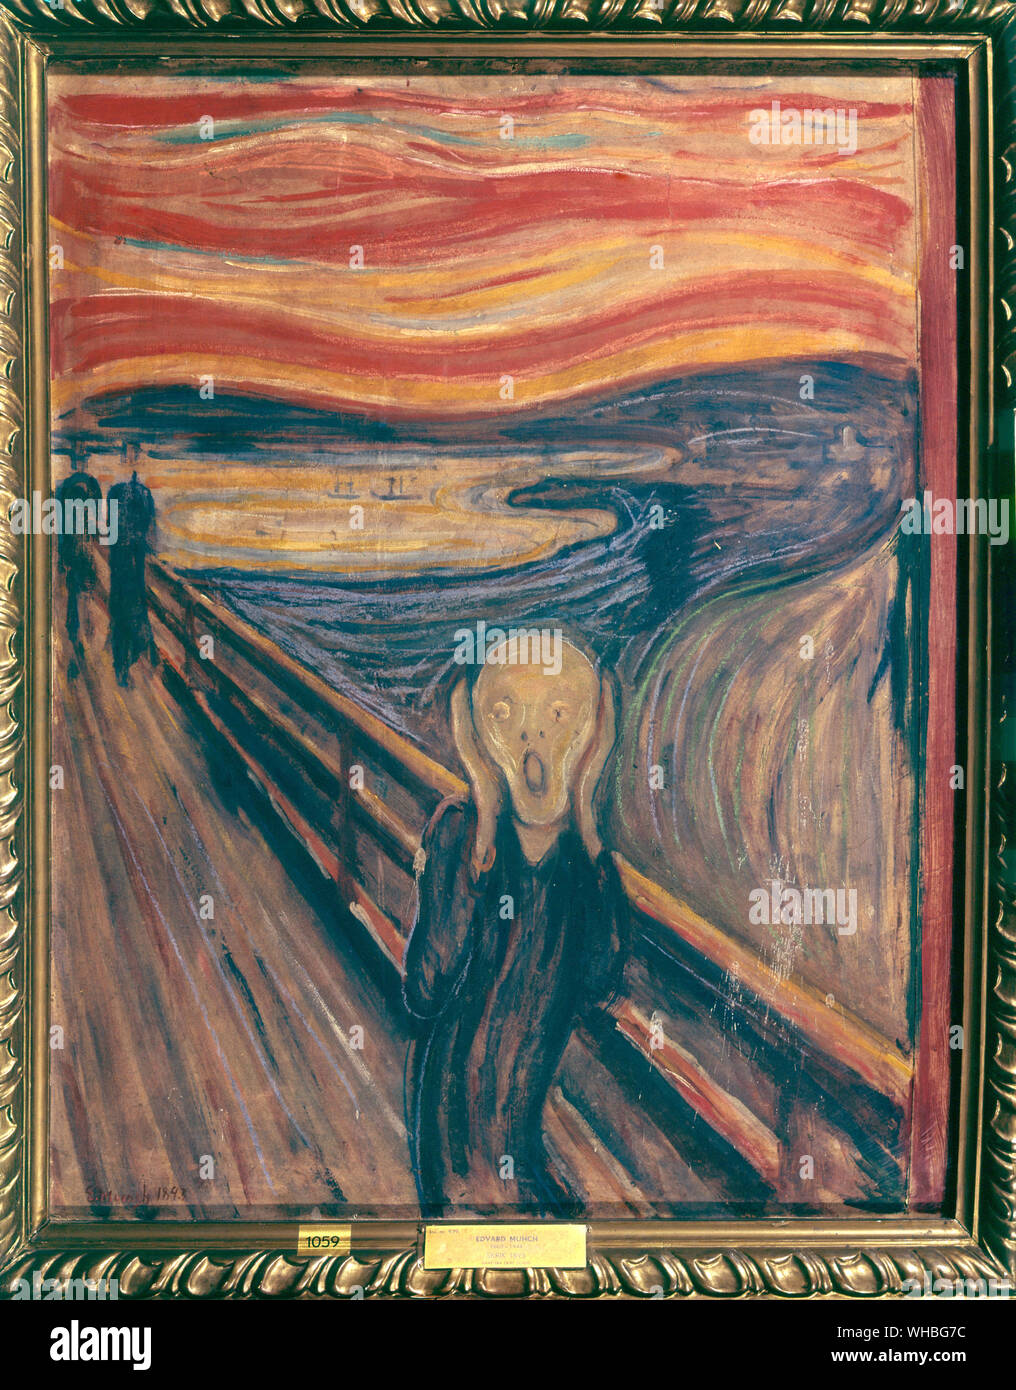 The Scream - Edward Munch - Edvard Munch , December 12, 1863 - January 23, 1944) was a Norwegian Symbolist painter, printmaker, and an important forerunner of Expressionistic art. His best-known painting, The Scream (1893), is one of the pieces in a series titled The Frieze of Life, in which Munch explored the themes of life, love, fear, death, and melancholy. As with many of his works, he painted several versions of it.. Stock Photo